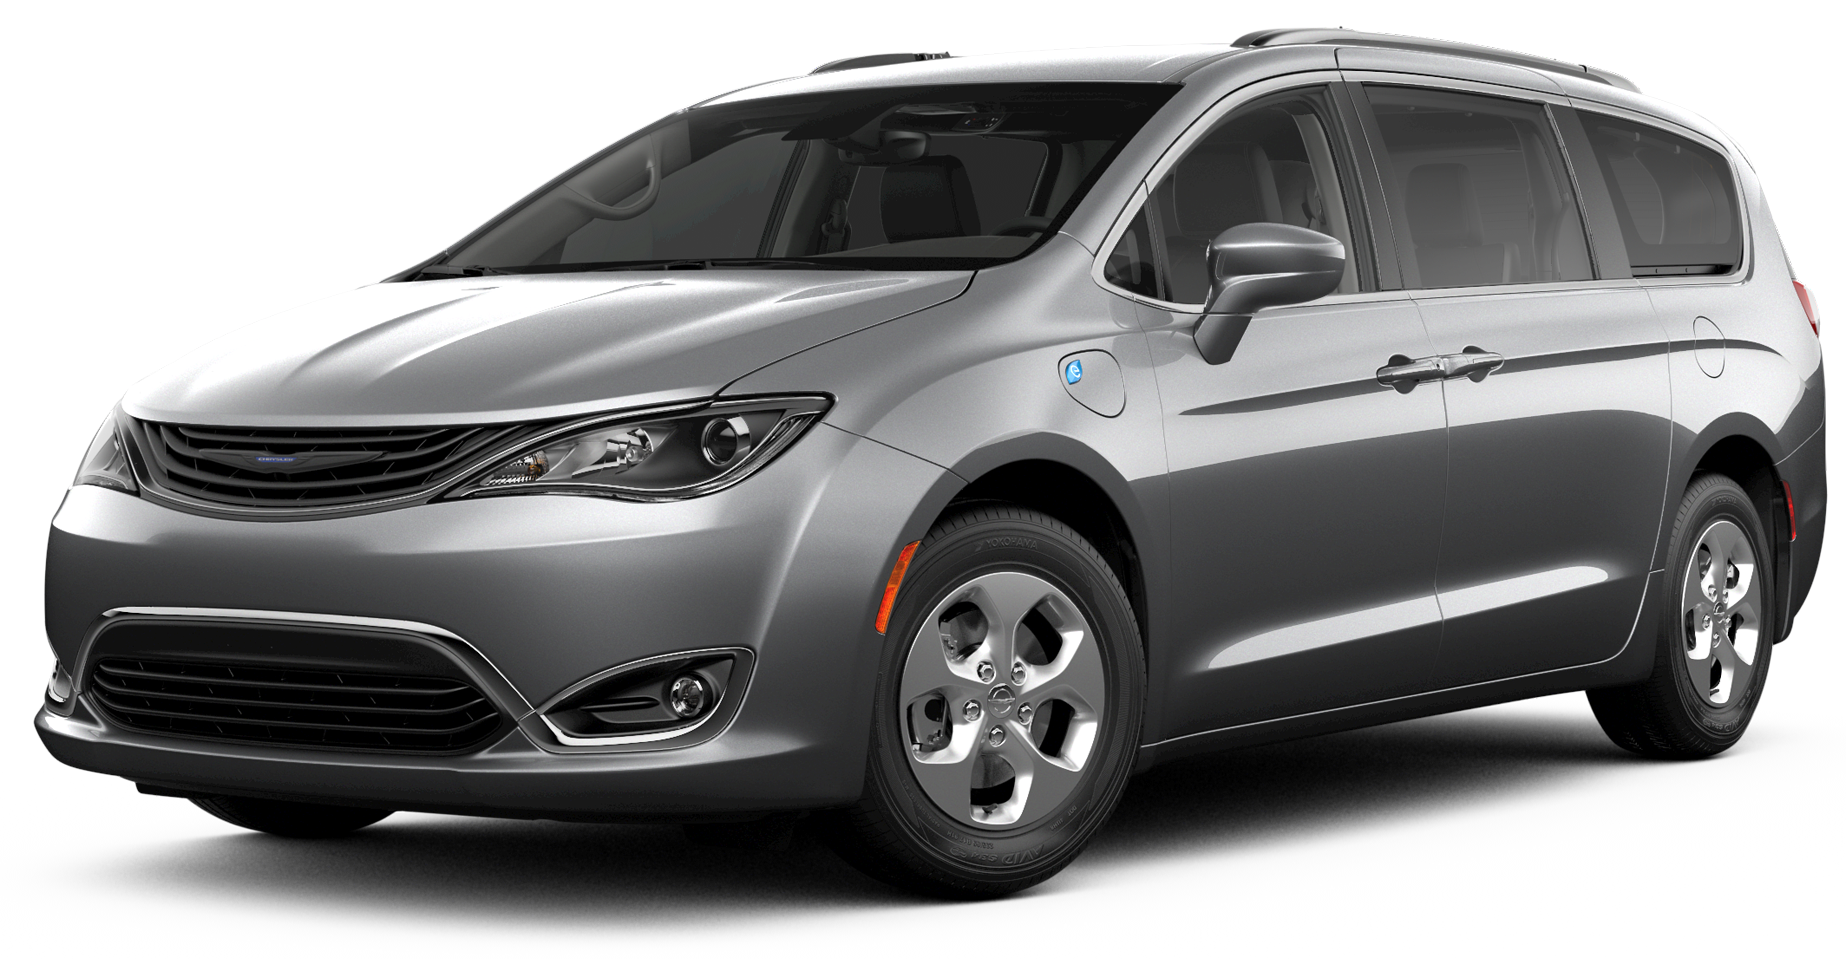 2019 Chrysler Pacifica Hybrid Incentives, Specials